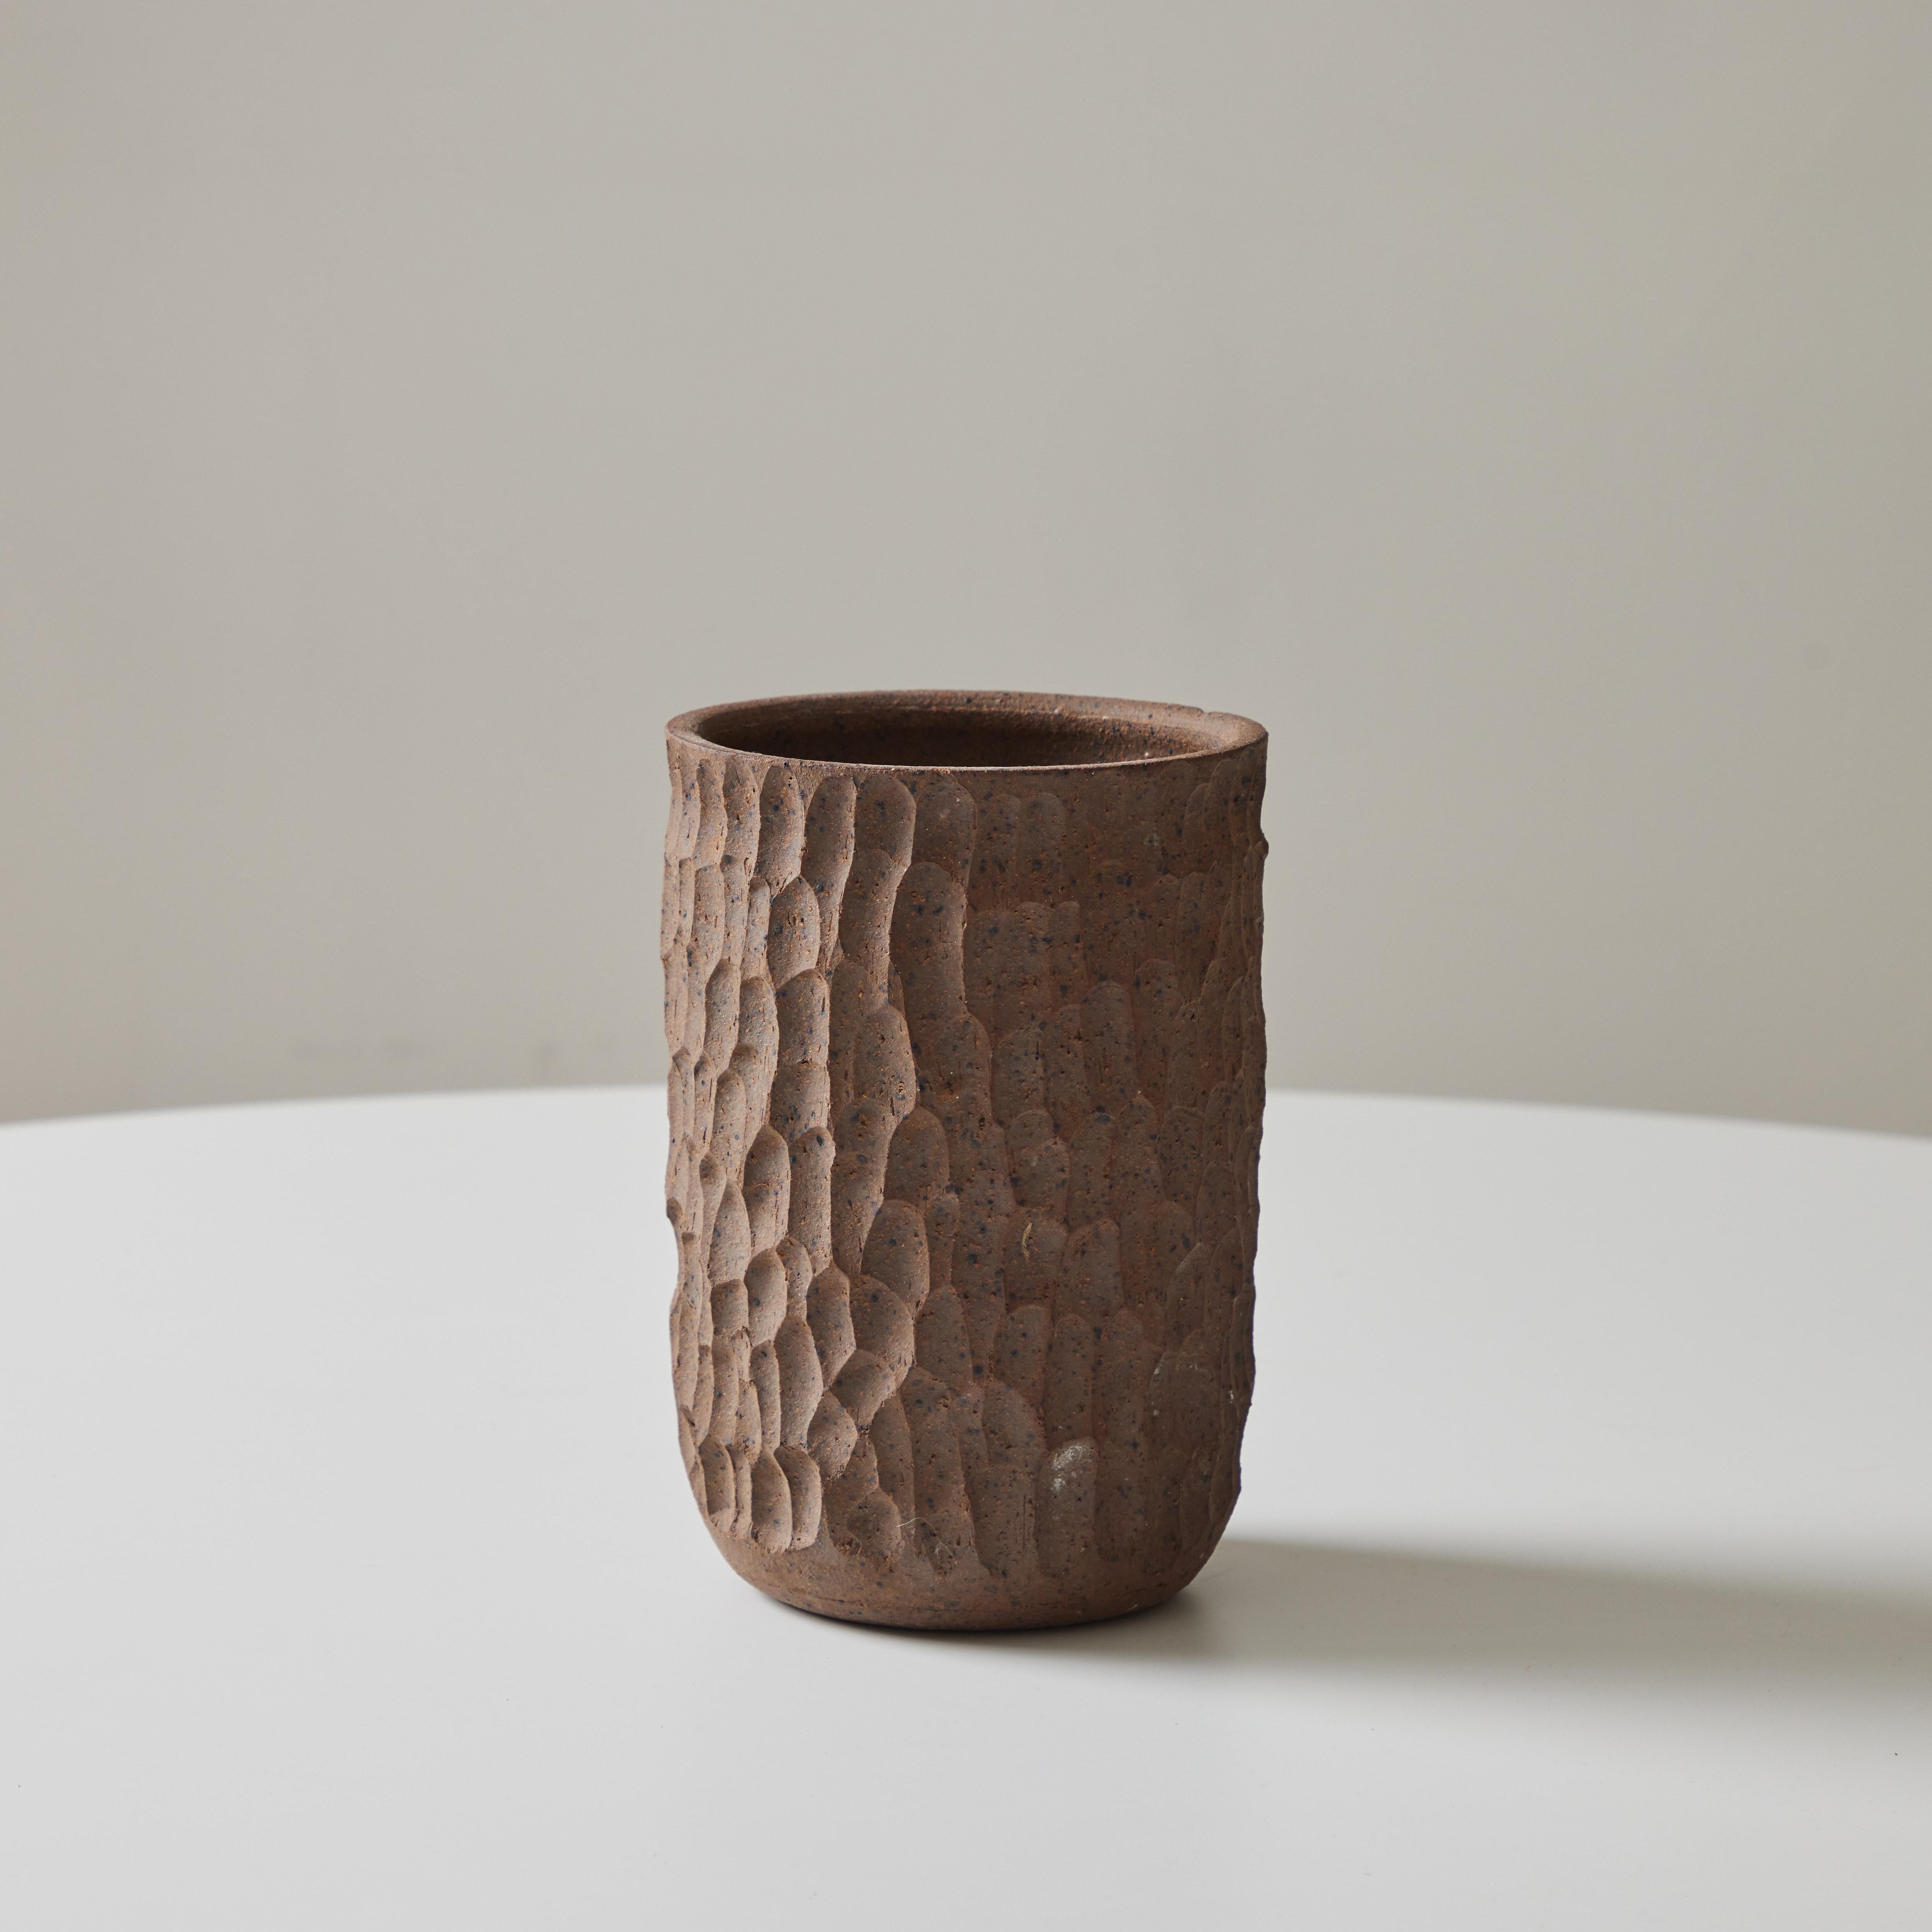 Rare Robert Maxwell & David Cressey Small Planter or Vase for Earthgender. Studio executed in hand thrown and designed textured earthenware. A very clean example from the short-lived and increasingly coveted Earth Gender design collective that only